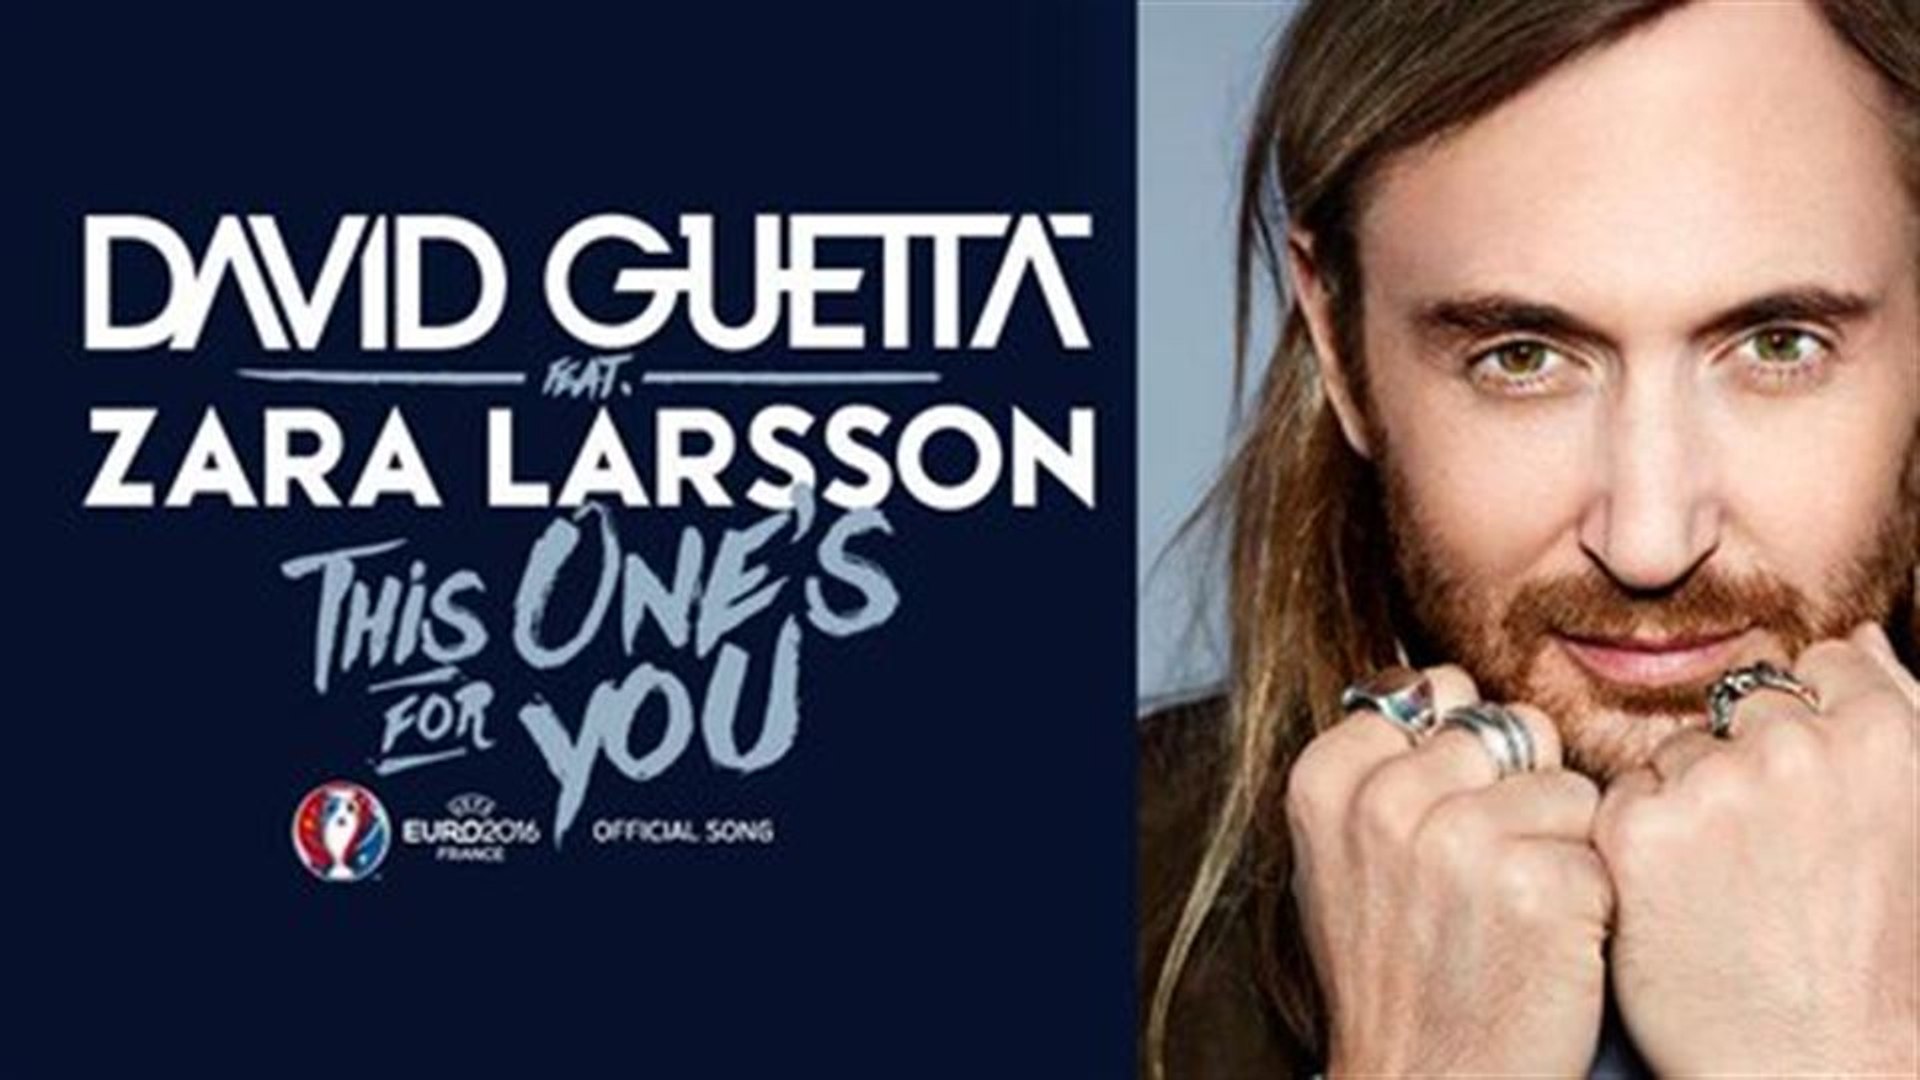 David Guetta ft. Zara Larsson - This One's For You. Euro - 2016 Official HD  - video Dailymotion